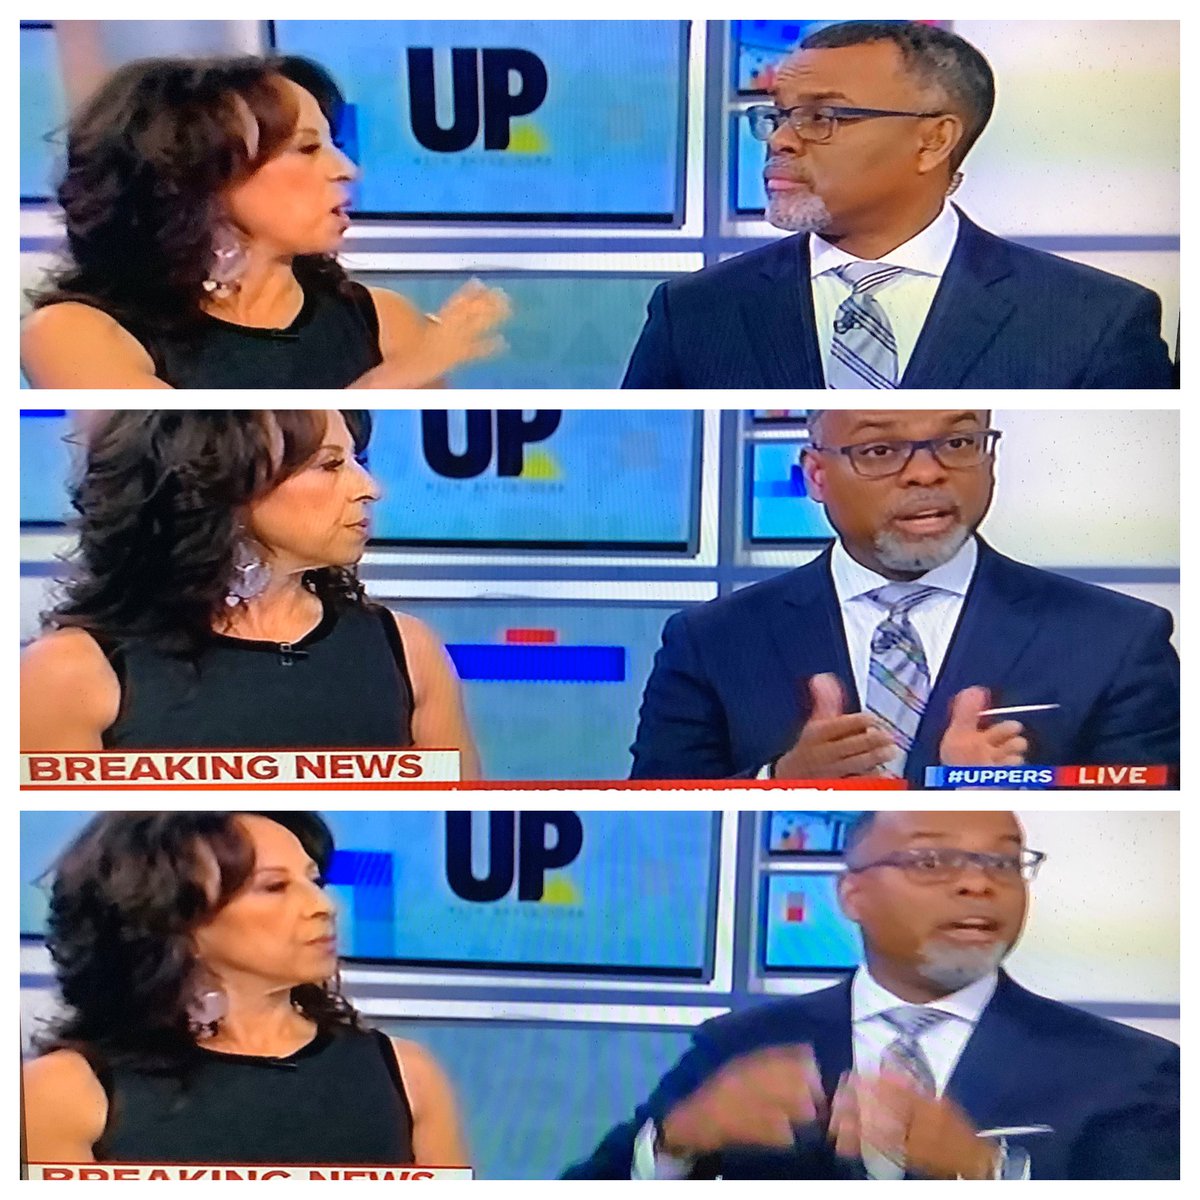 @esglaude @UPonMSNBC @davidgura @tomkeene @Maria_Hinojosa Then there’s the #DistinguishedProfessor explaining the world to us. And #journalist & #activist @Maria_Hinojosa challenging #Dems, incl prez candidates for more, esp more skepticism. (Sorry Maria if ur uncomfortable w/ an activist label but that how I see you @InTheThickShow)